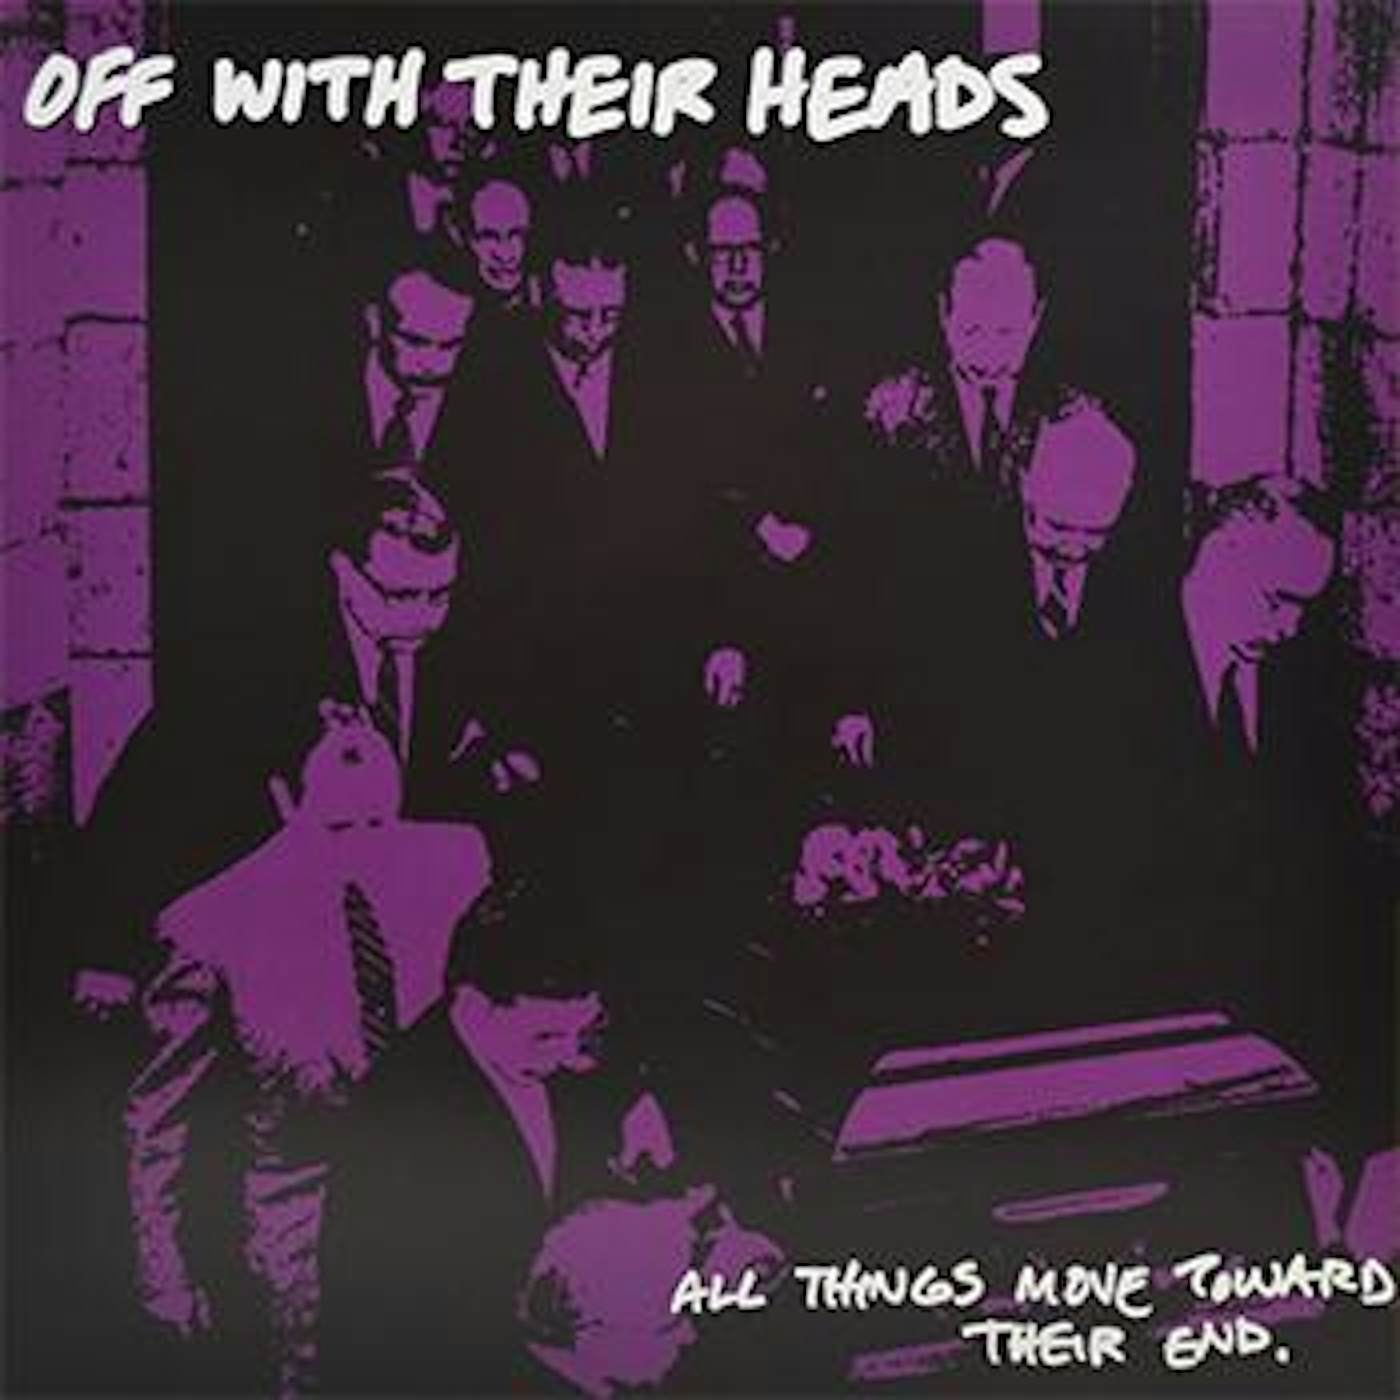 Off With Their Heads - All Things Move Toward Their End LP - Highlighter Yellow Smoke (Vinyl)